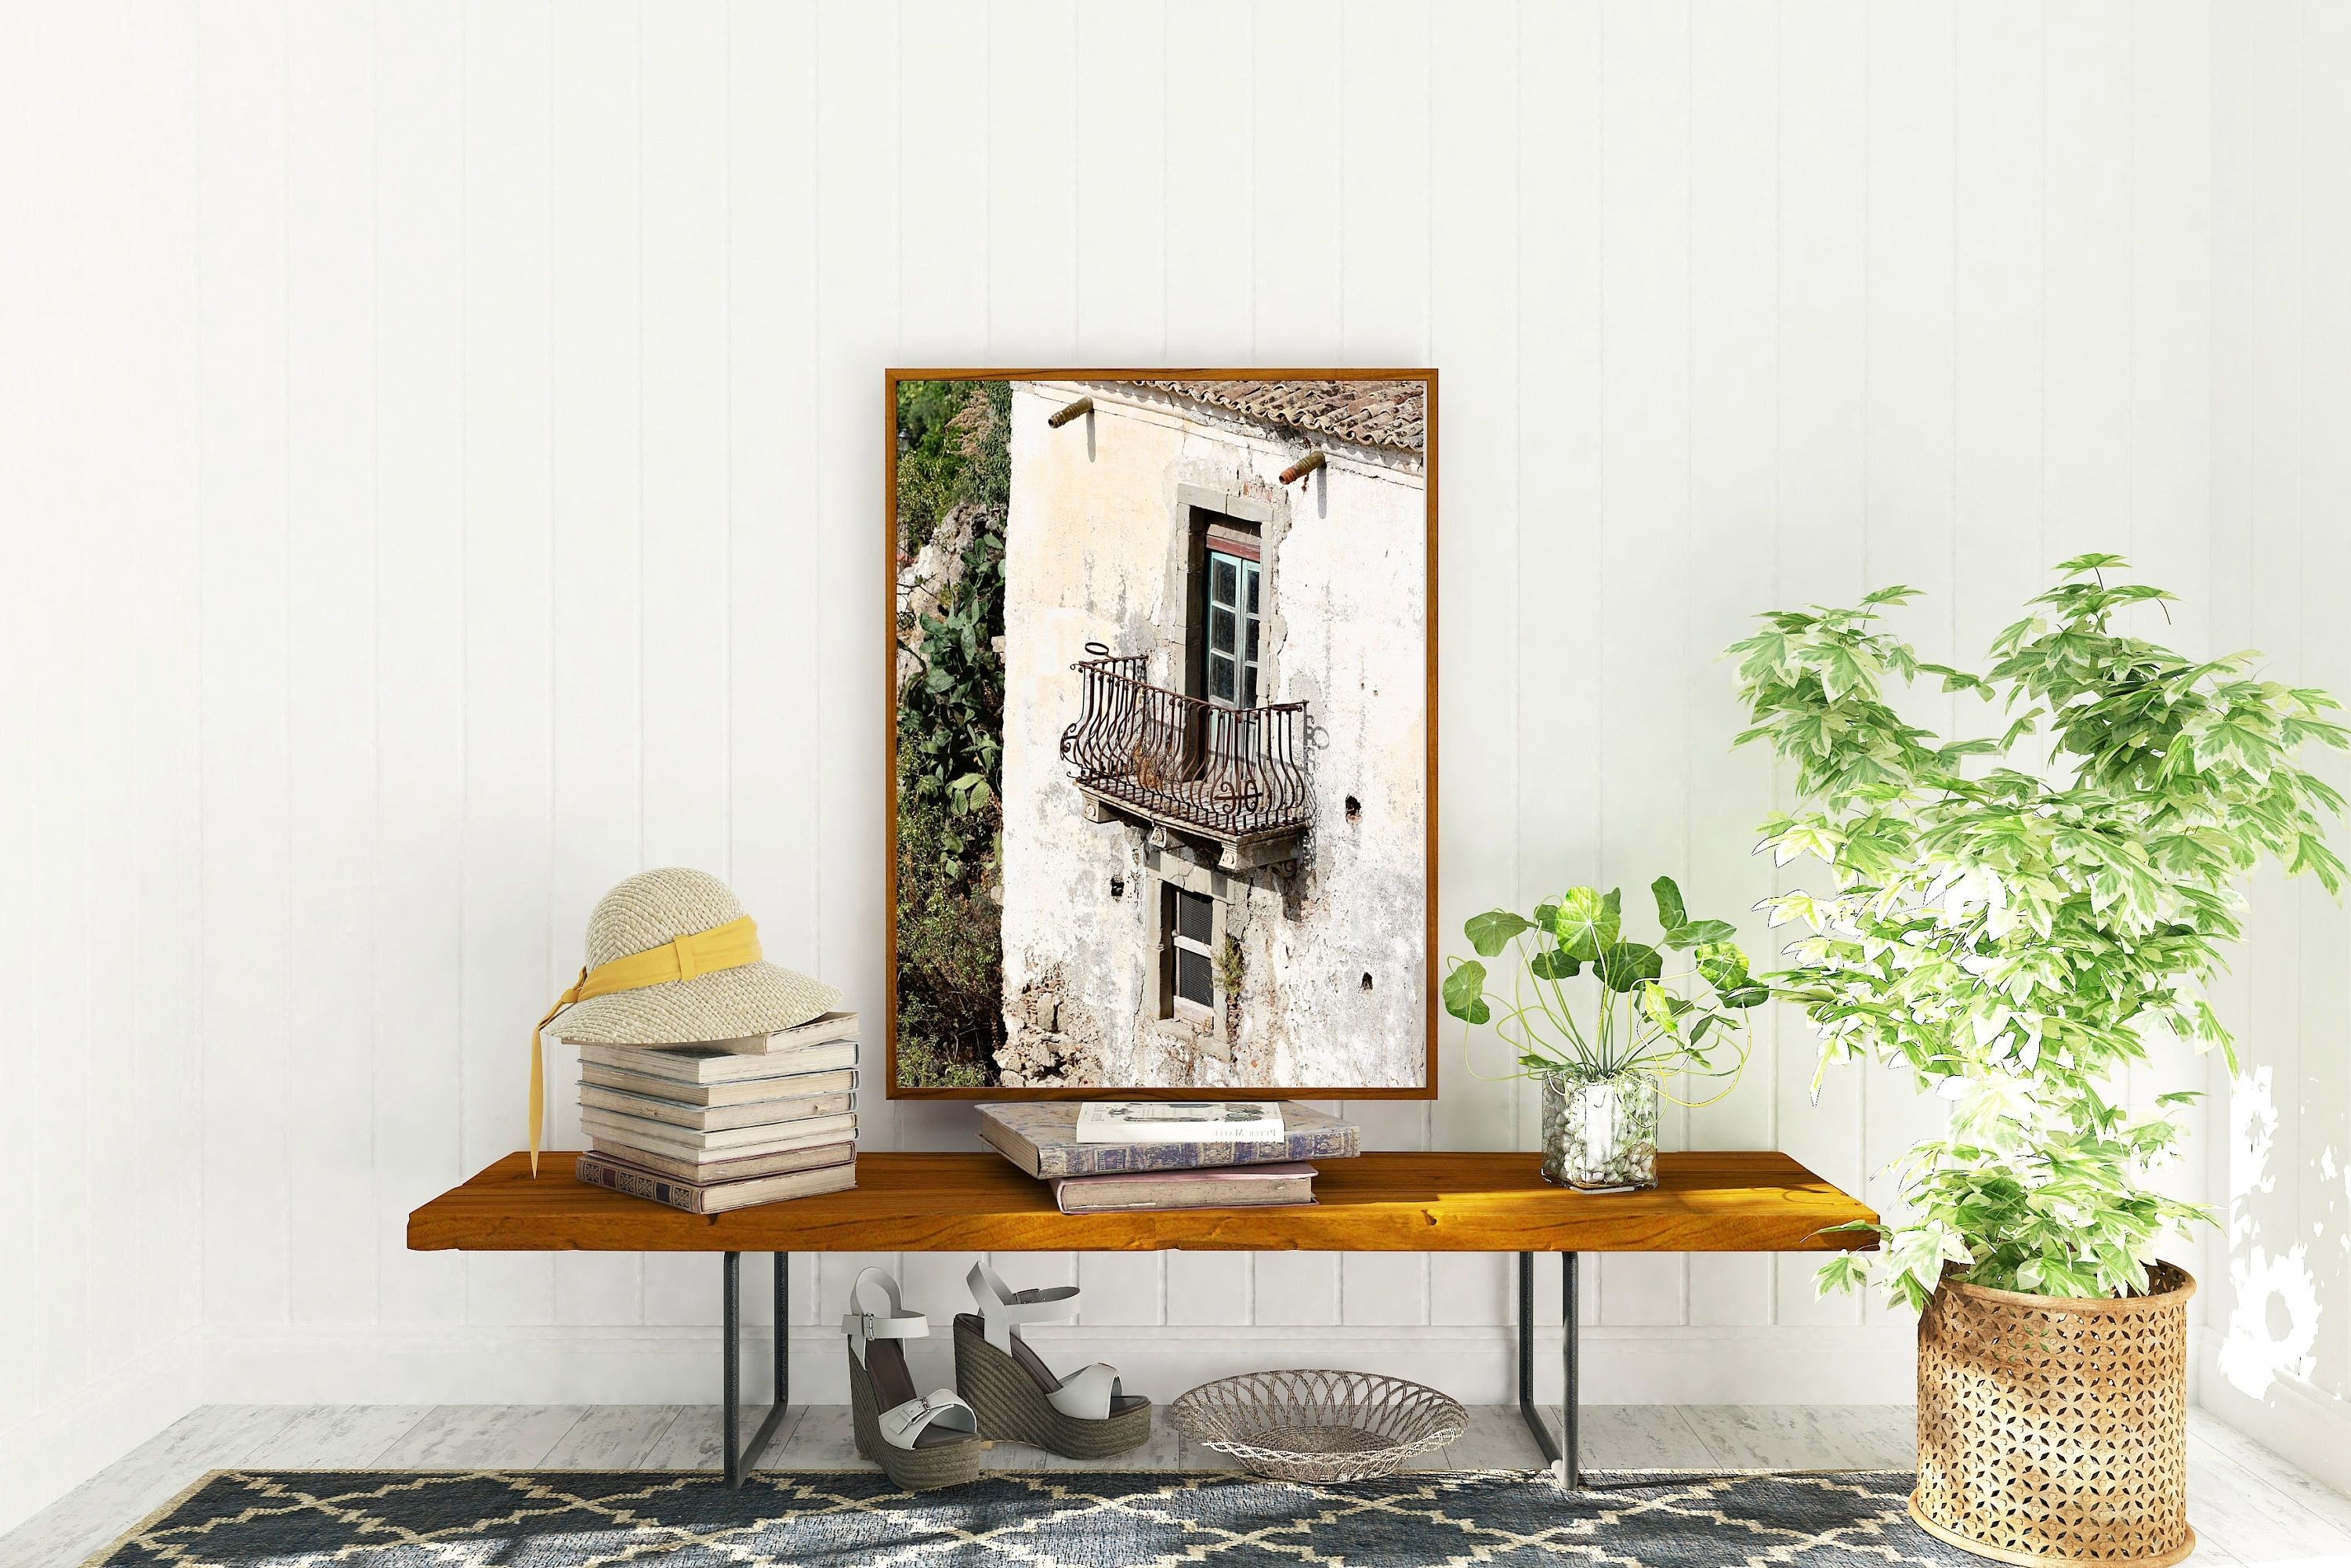 Sicily Italy Photography – Balcony Print – Rustic Italian Decor Within Most Up To Date Rustic Italian Wall Art (View 9 of 15)